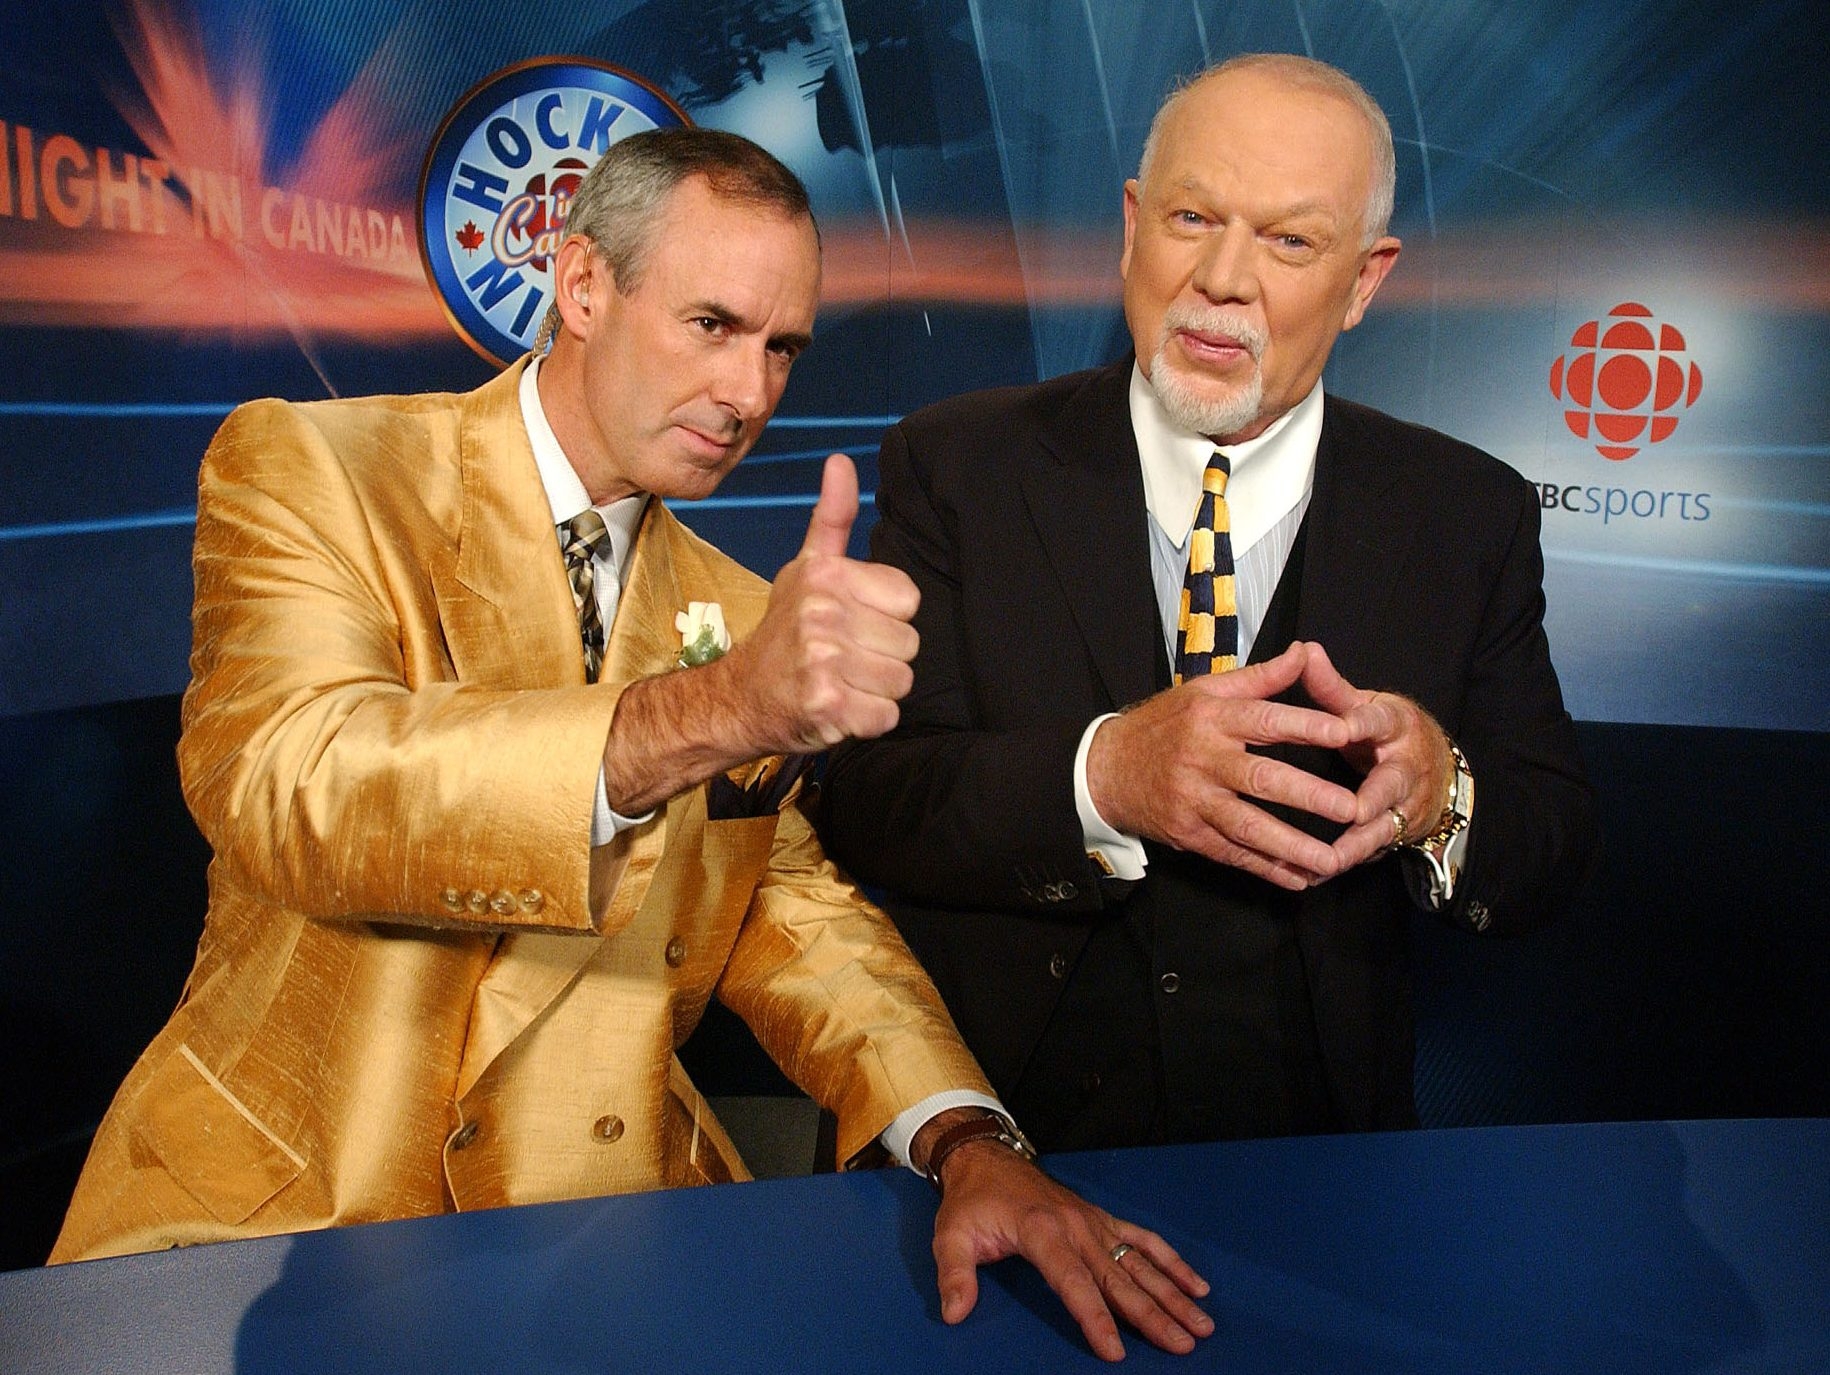 Don Cherry fired from 'Hockey Night in Canada' after remarks on TV